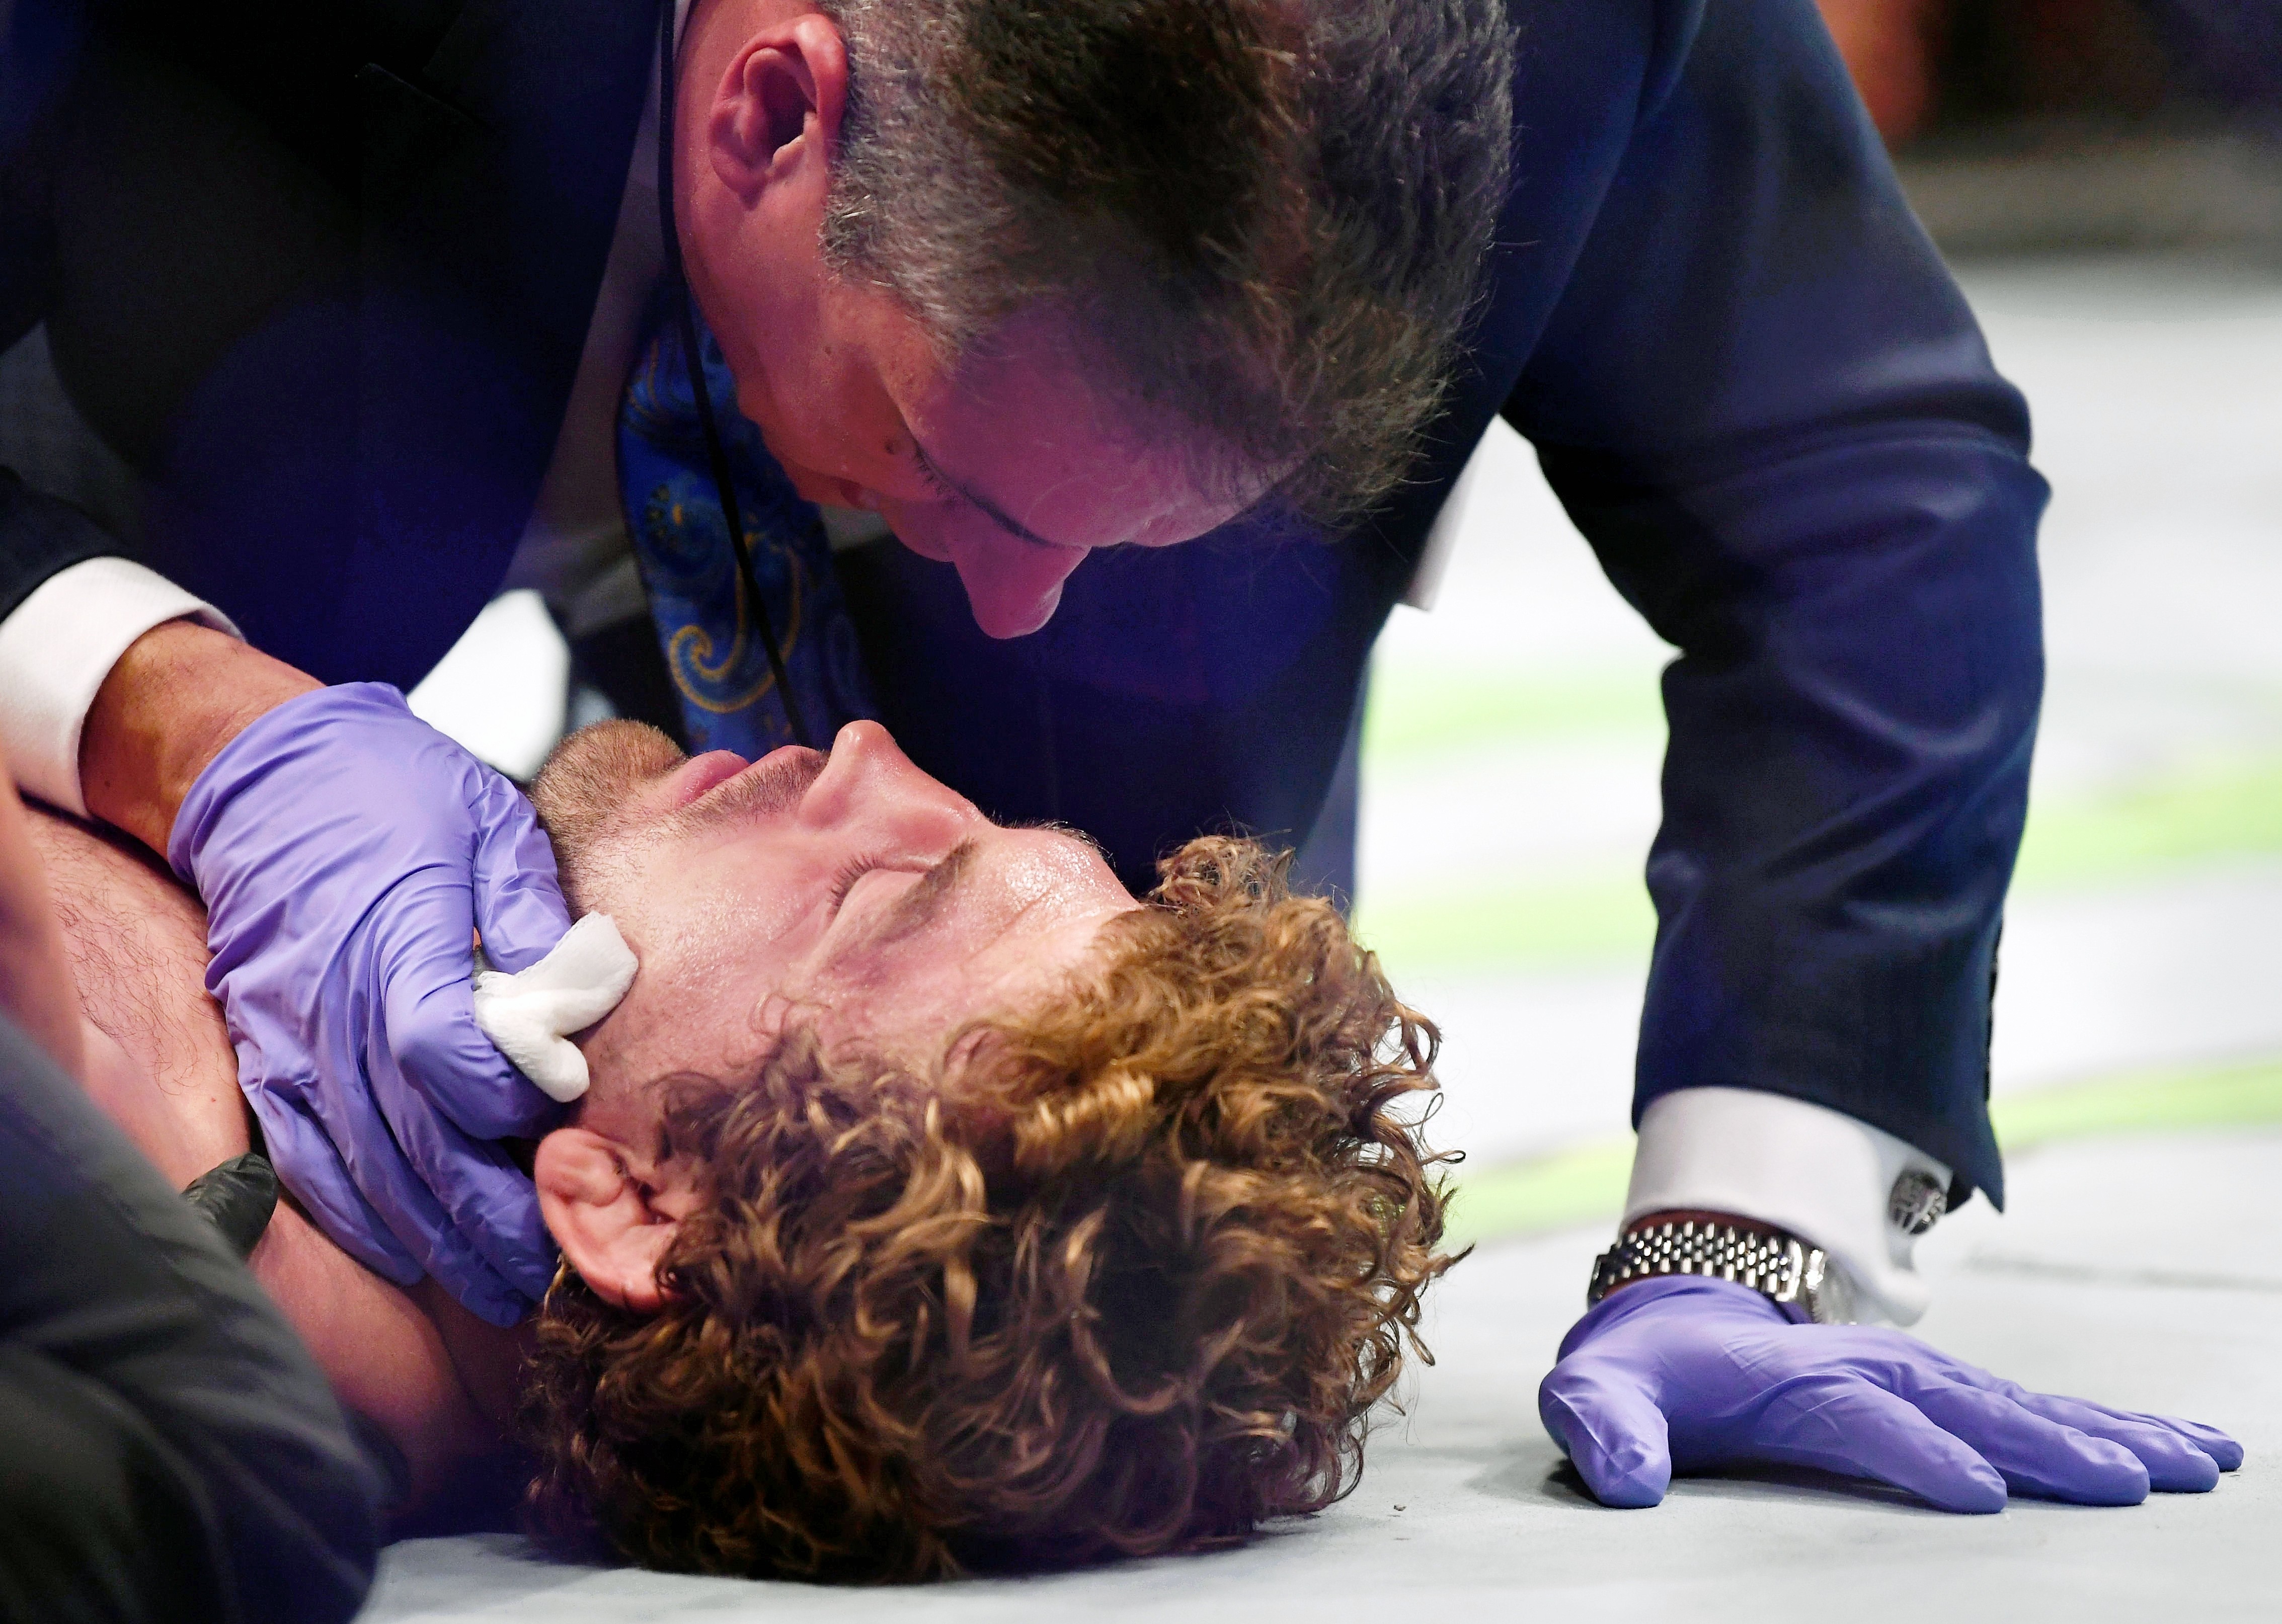 Ben Askren is assessed by medical personnel after being knocked out with a knee by Jorge Masvidal at T-Mobile Arena. Photo: USA TODAY Sports